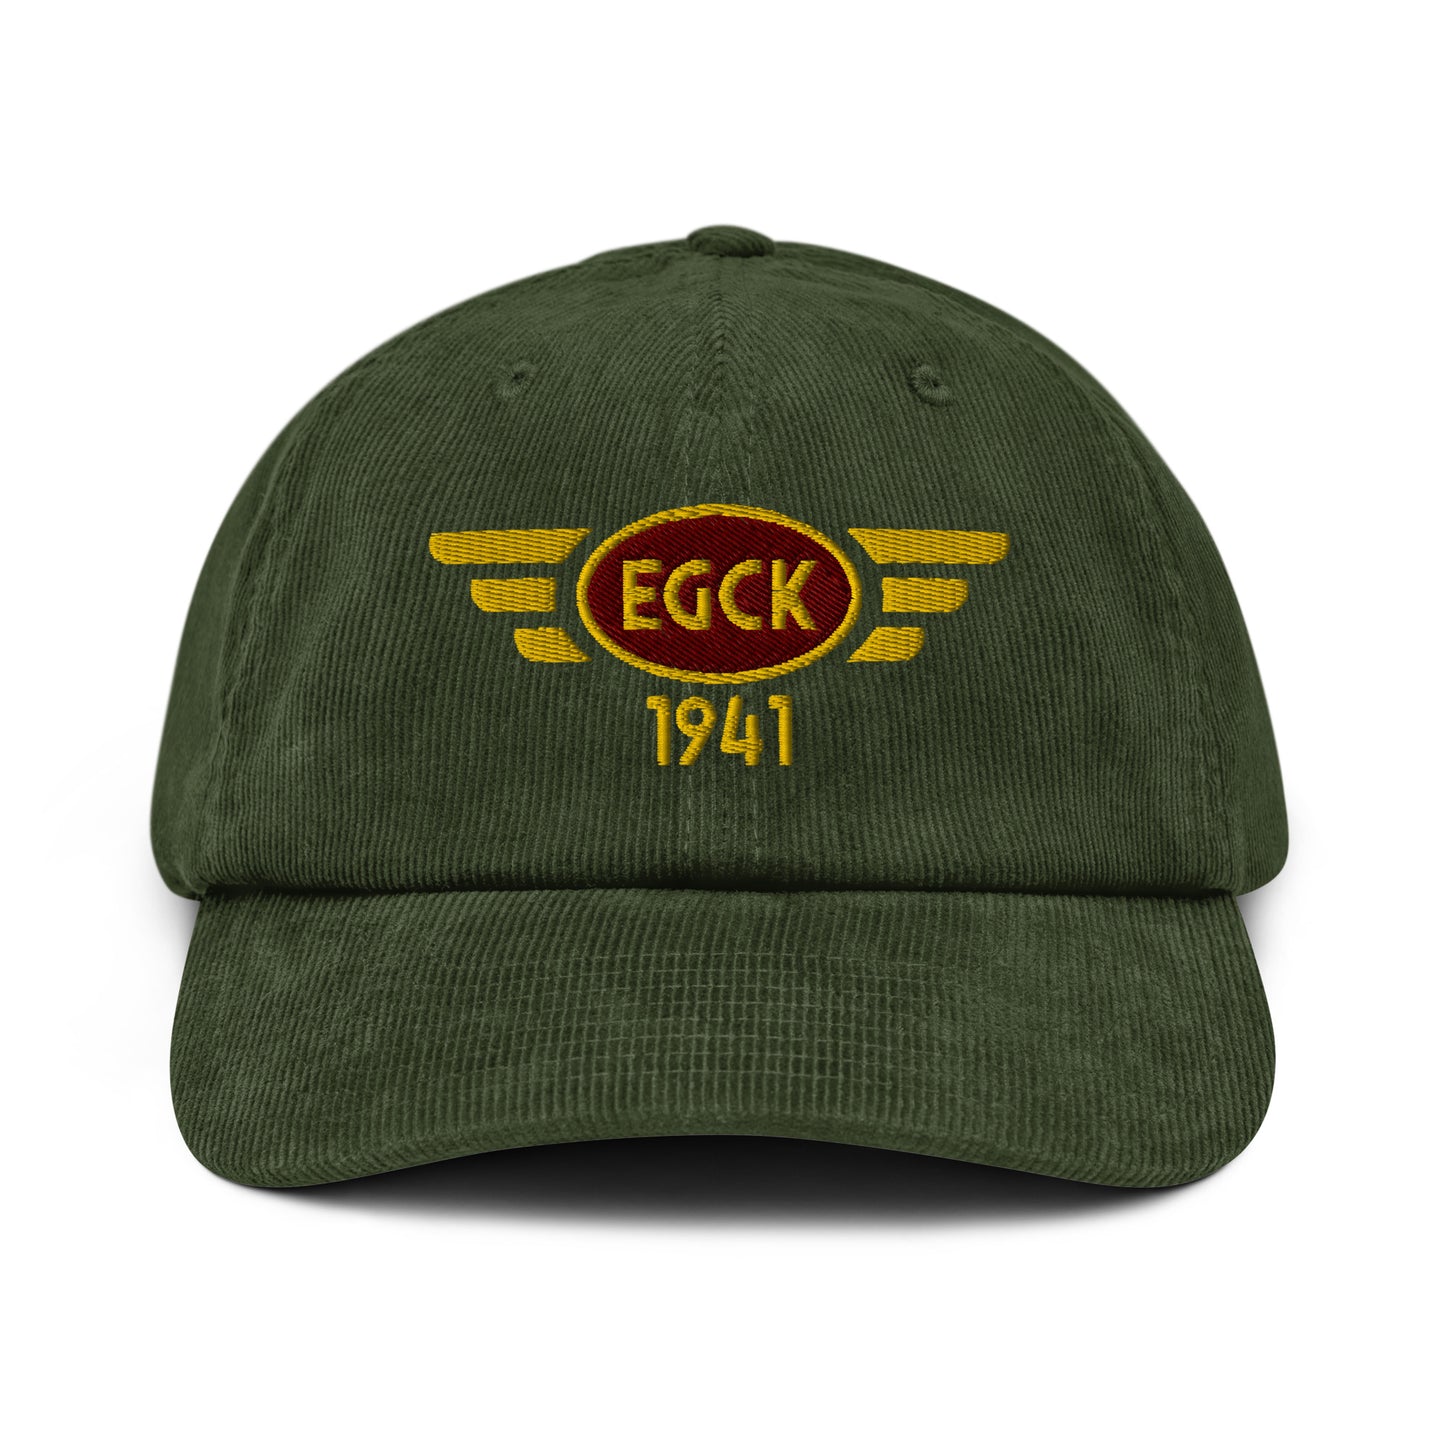 Caernarfon Airport corduroy cap with embroidered ICAO code.